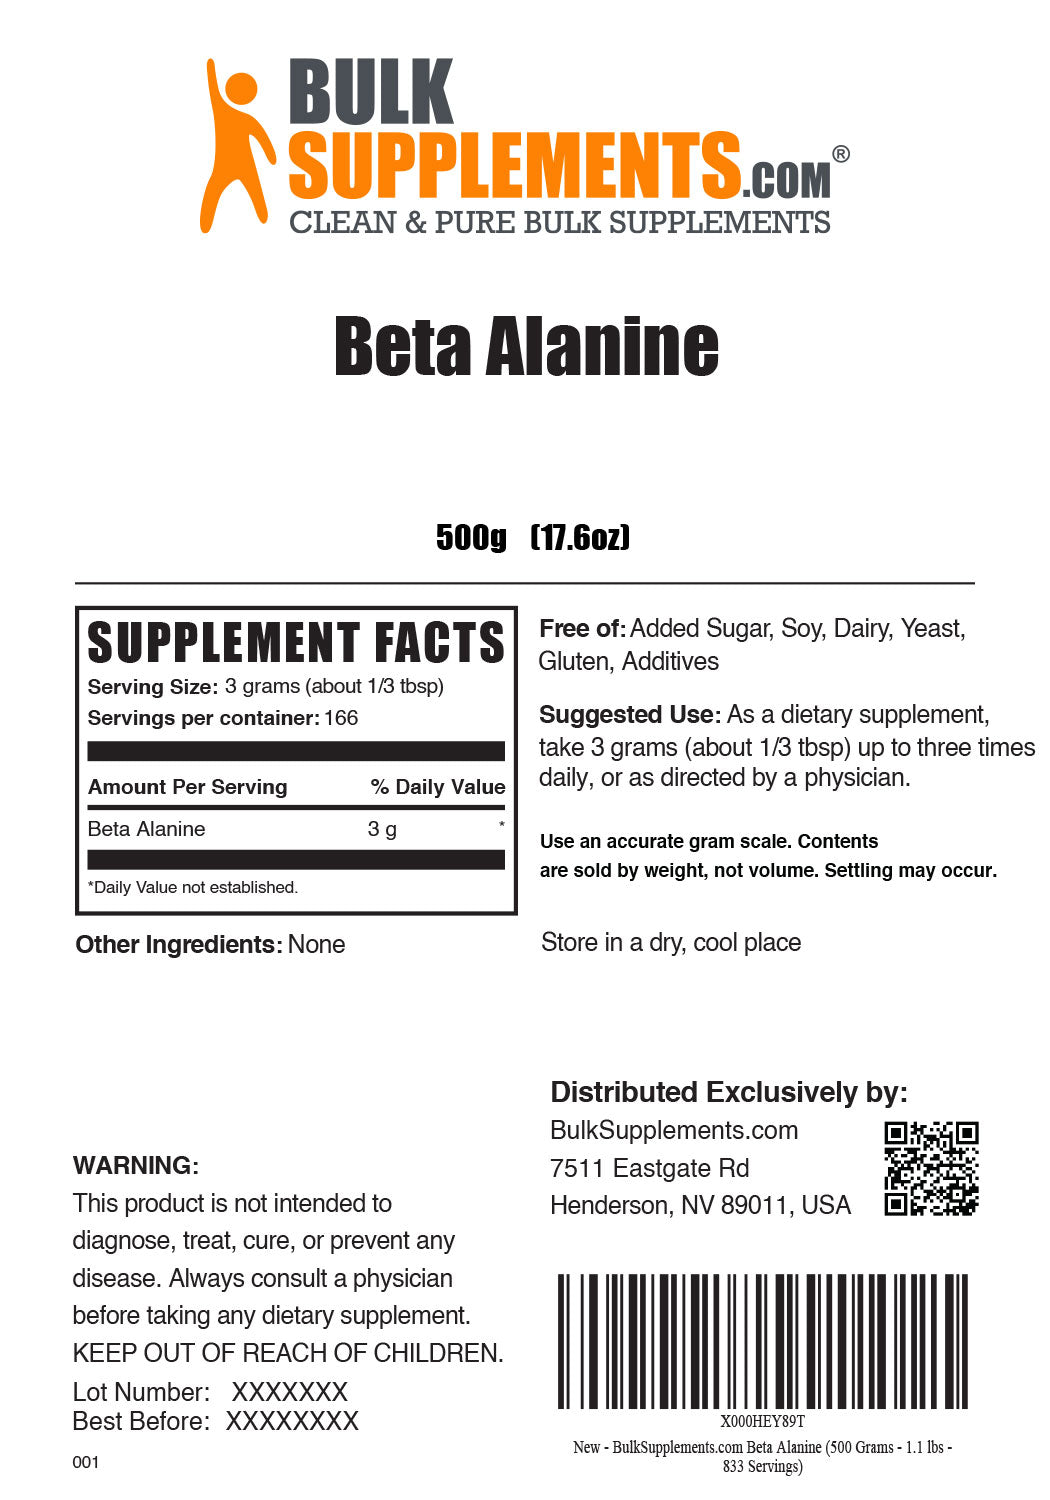 Beta Alanine Supplement Facts for 500g Bag